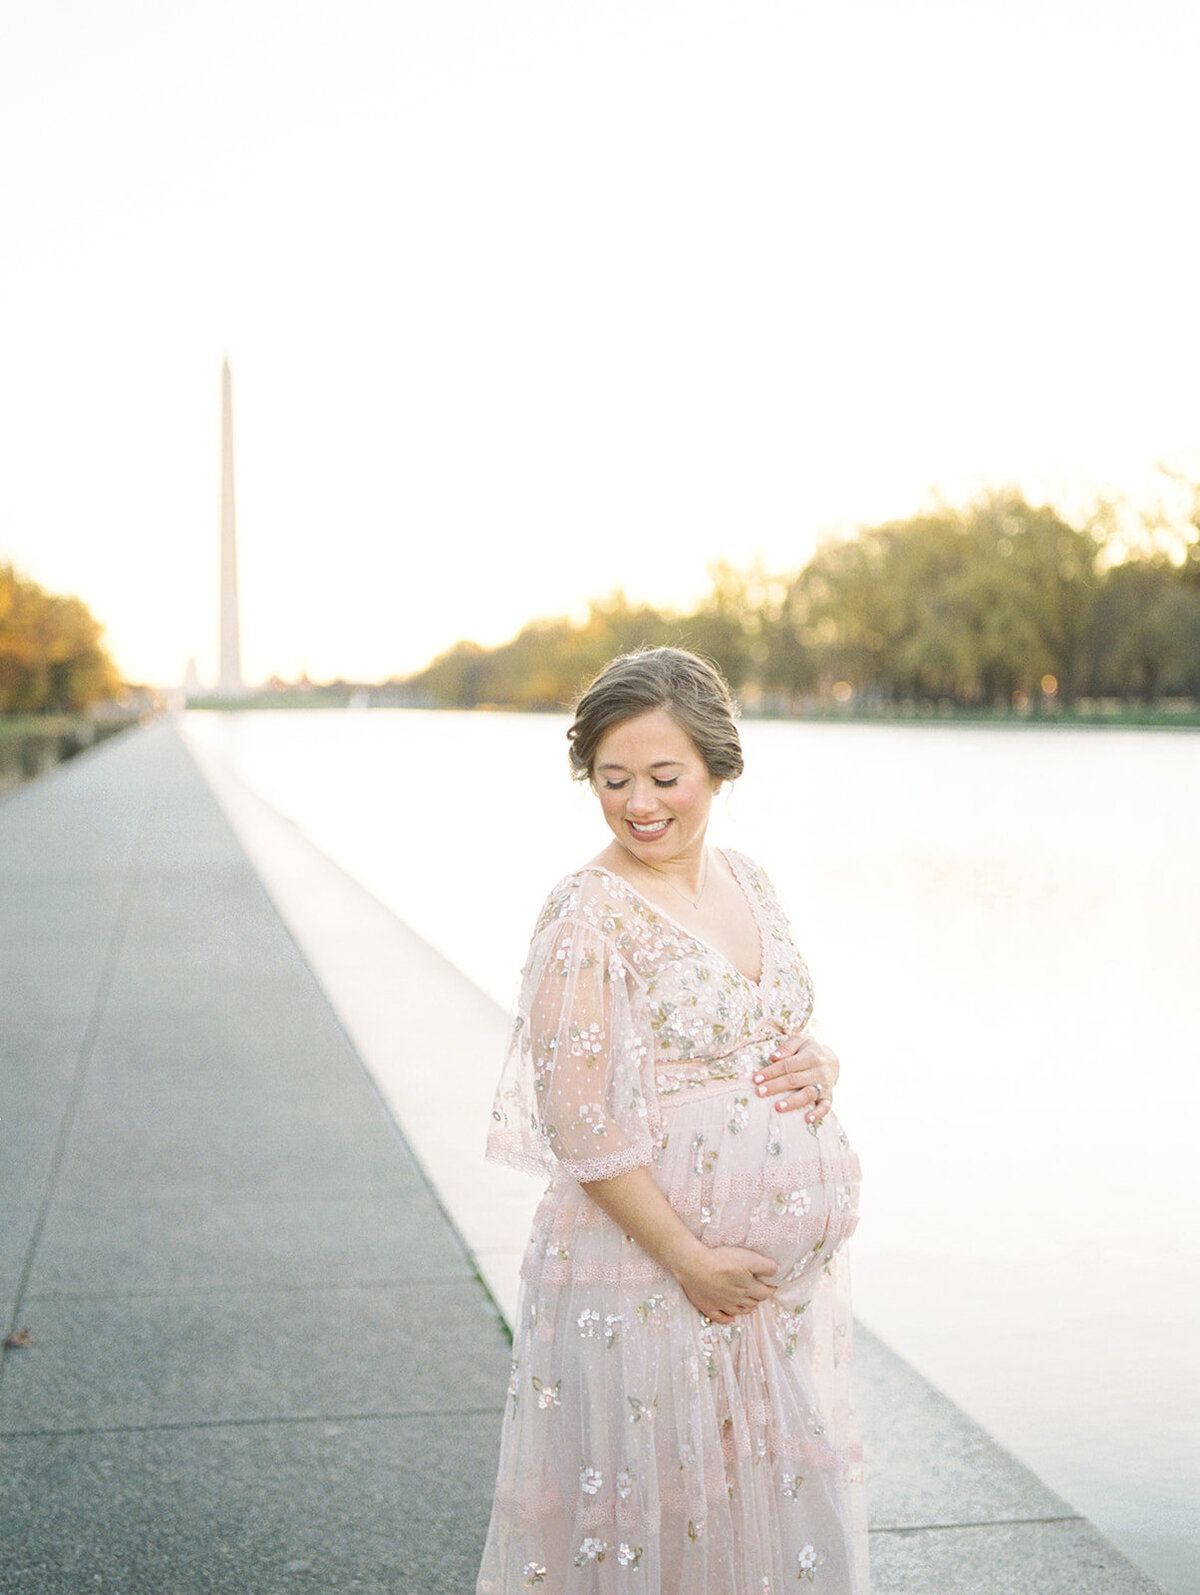 Pregnant mother stands with one hand on top of her belly, one hand below by Reflecting Pool in Washington, D.C.